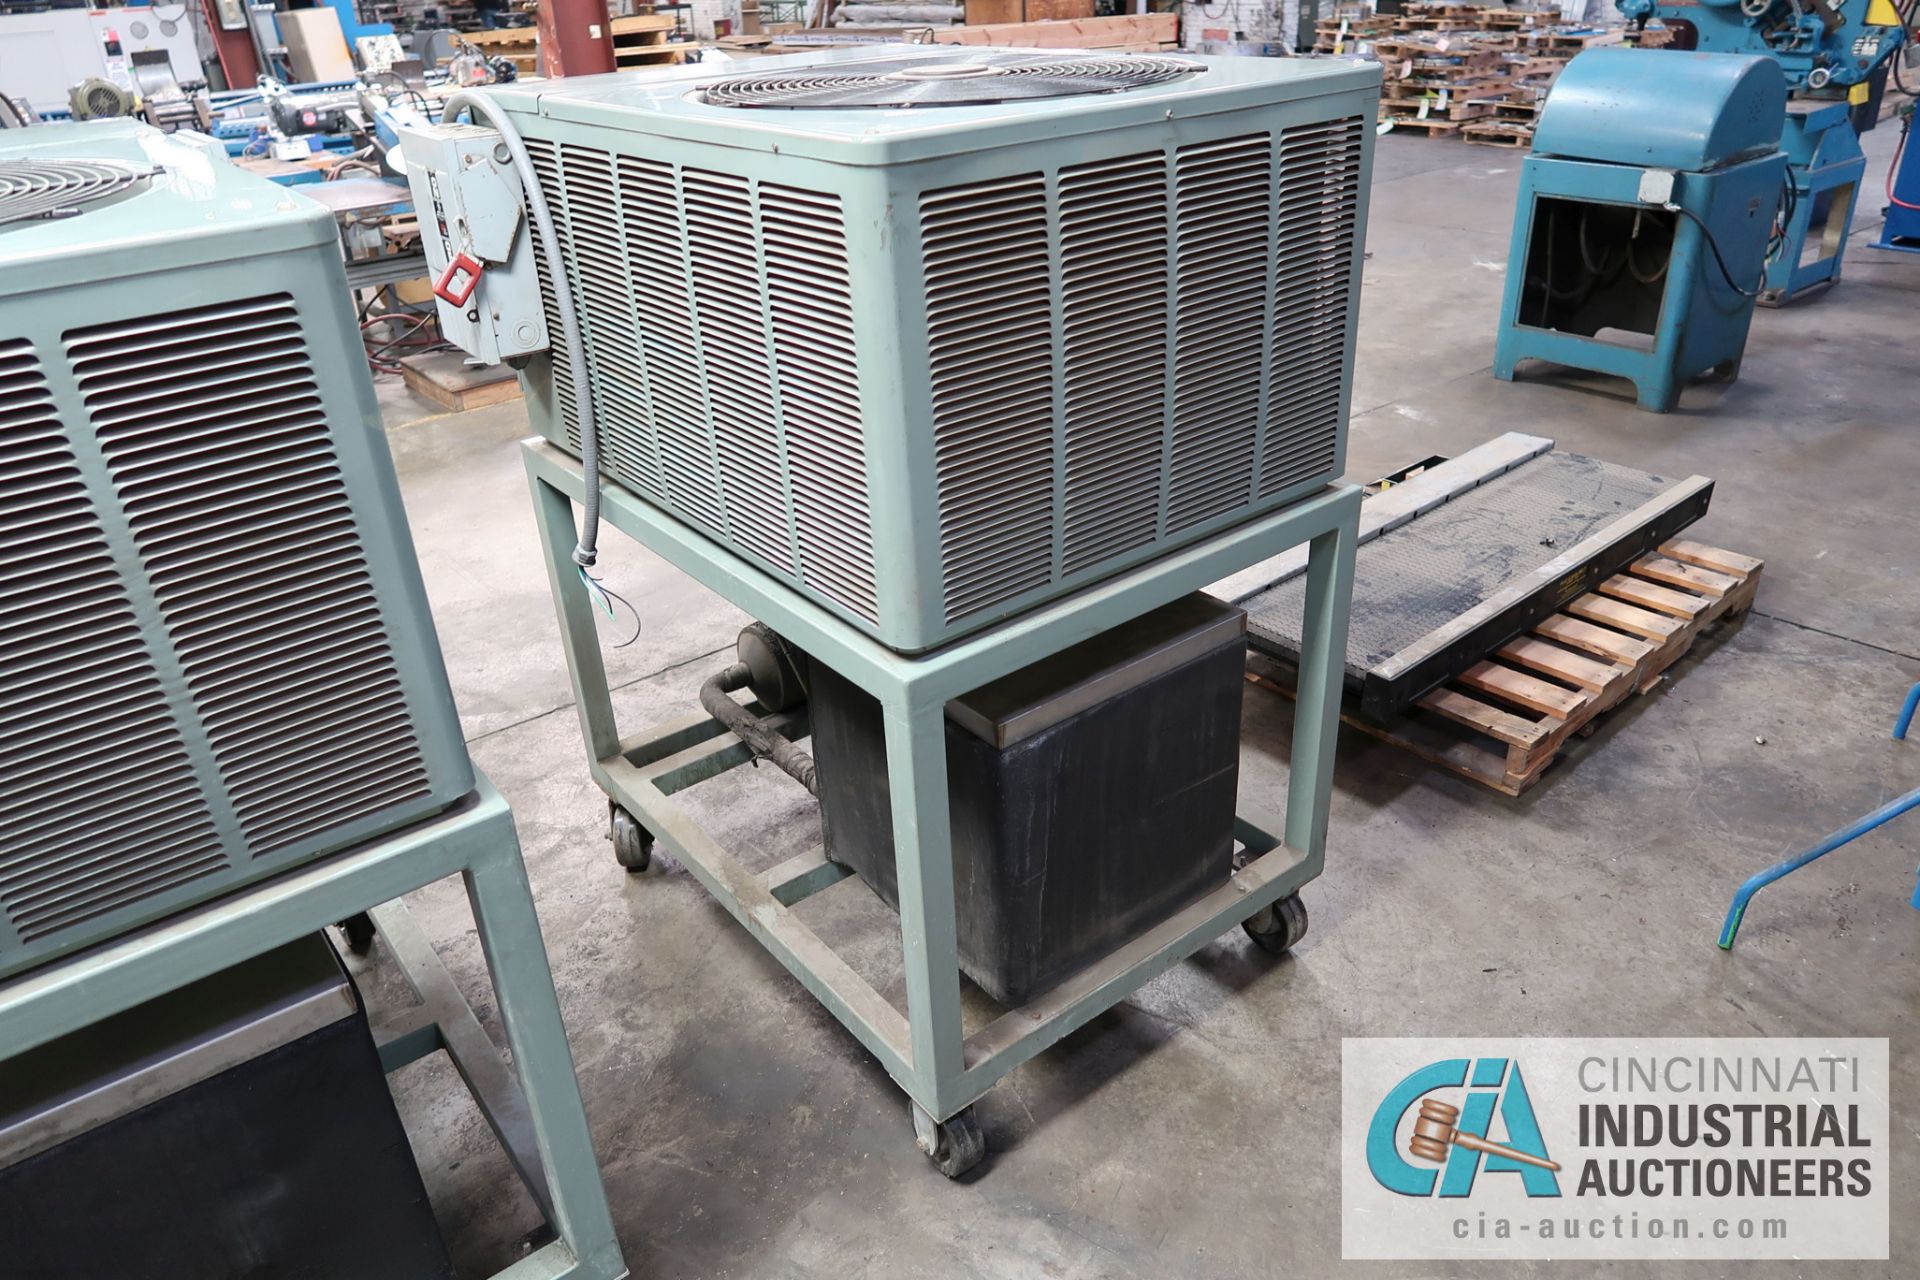 COLD SHOT CHILLER MODEL ACEC-60-E PORTABLE CHILLER; S/N MO22608-1, 1 HP PUMP, R-22 FREON, 460/3 - Image 6 of 6